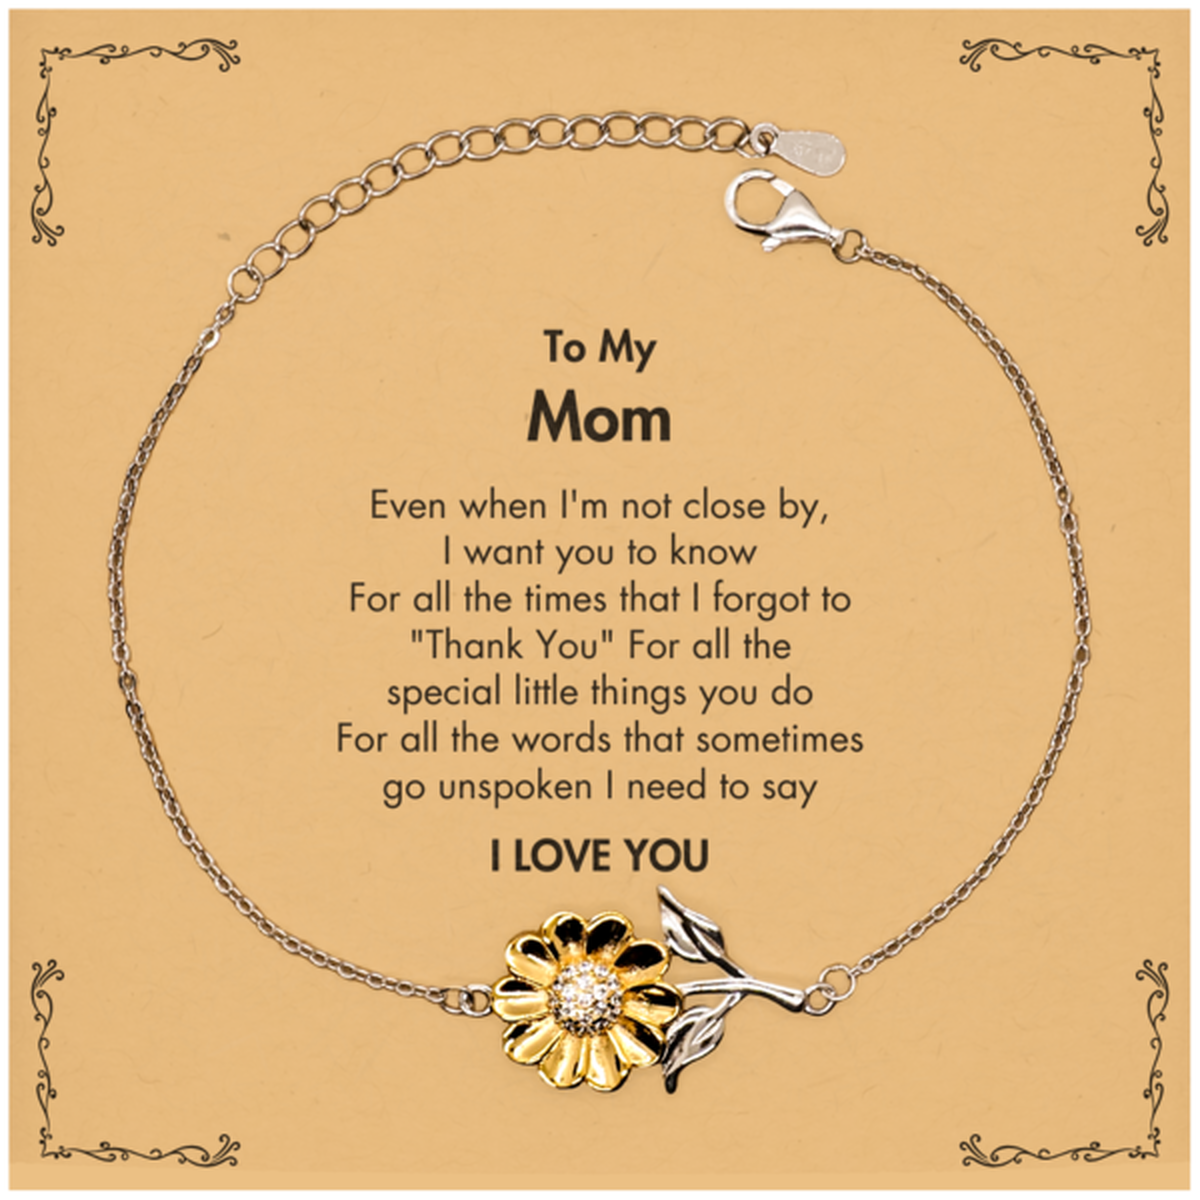 Thank You Gifts for Mom, Keepsake Sunflower Bracelet Gifts for Mom Birthday Mother's day Father's Day Mom For all the words That sometimes go unspoken I need to say I LOVE YOU